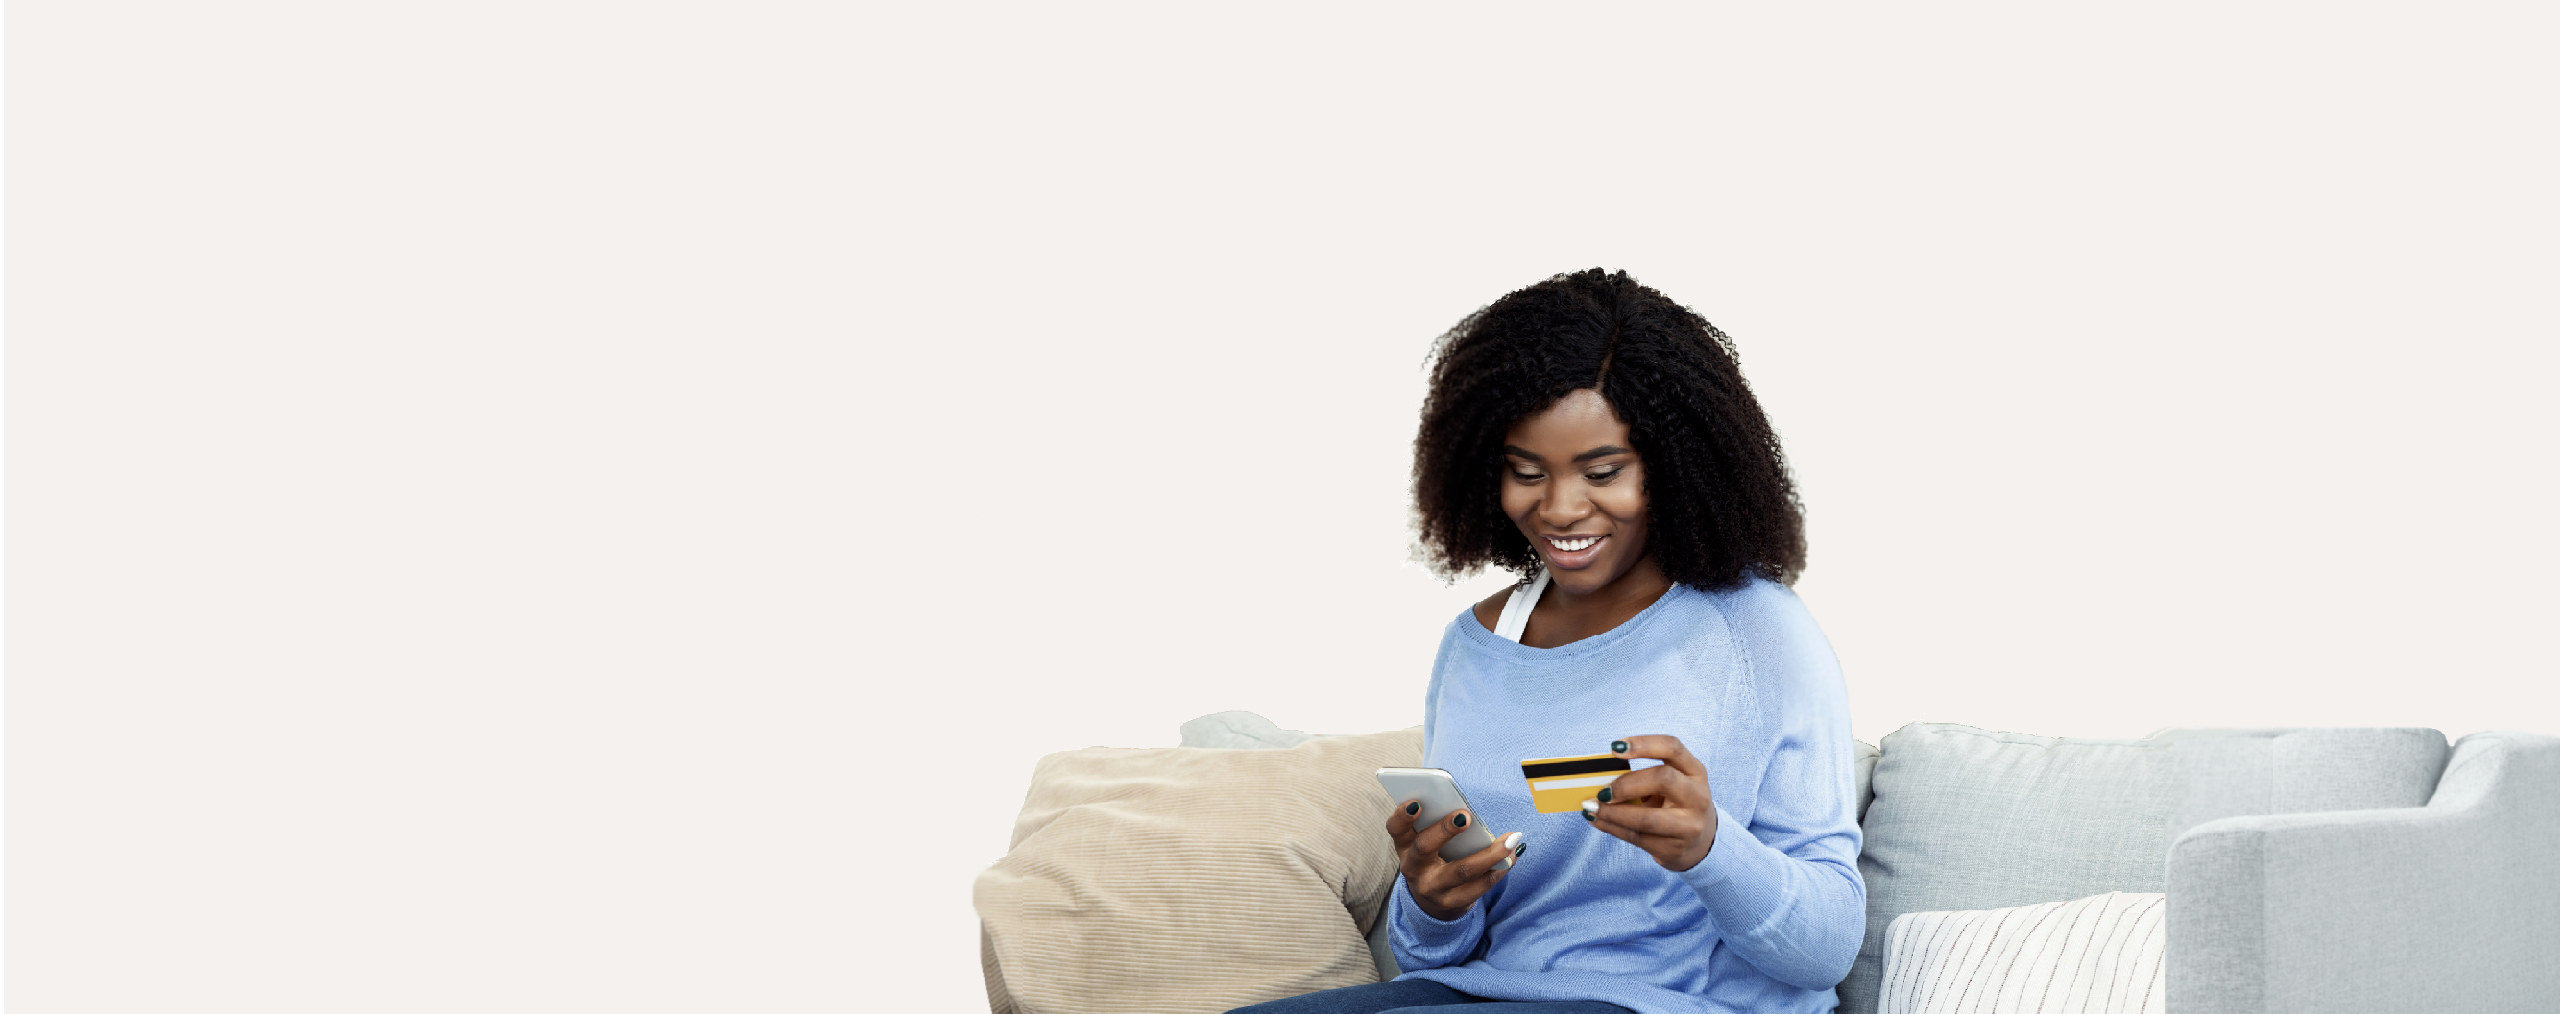 Woman sitting on couch with phone and card